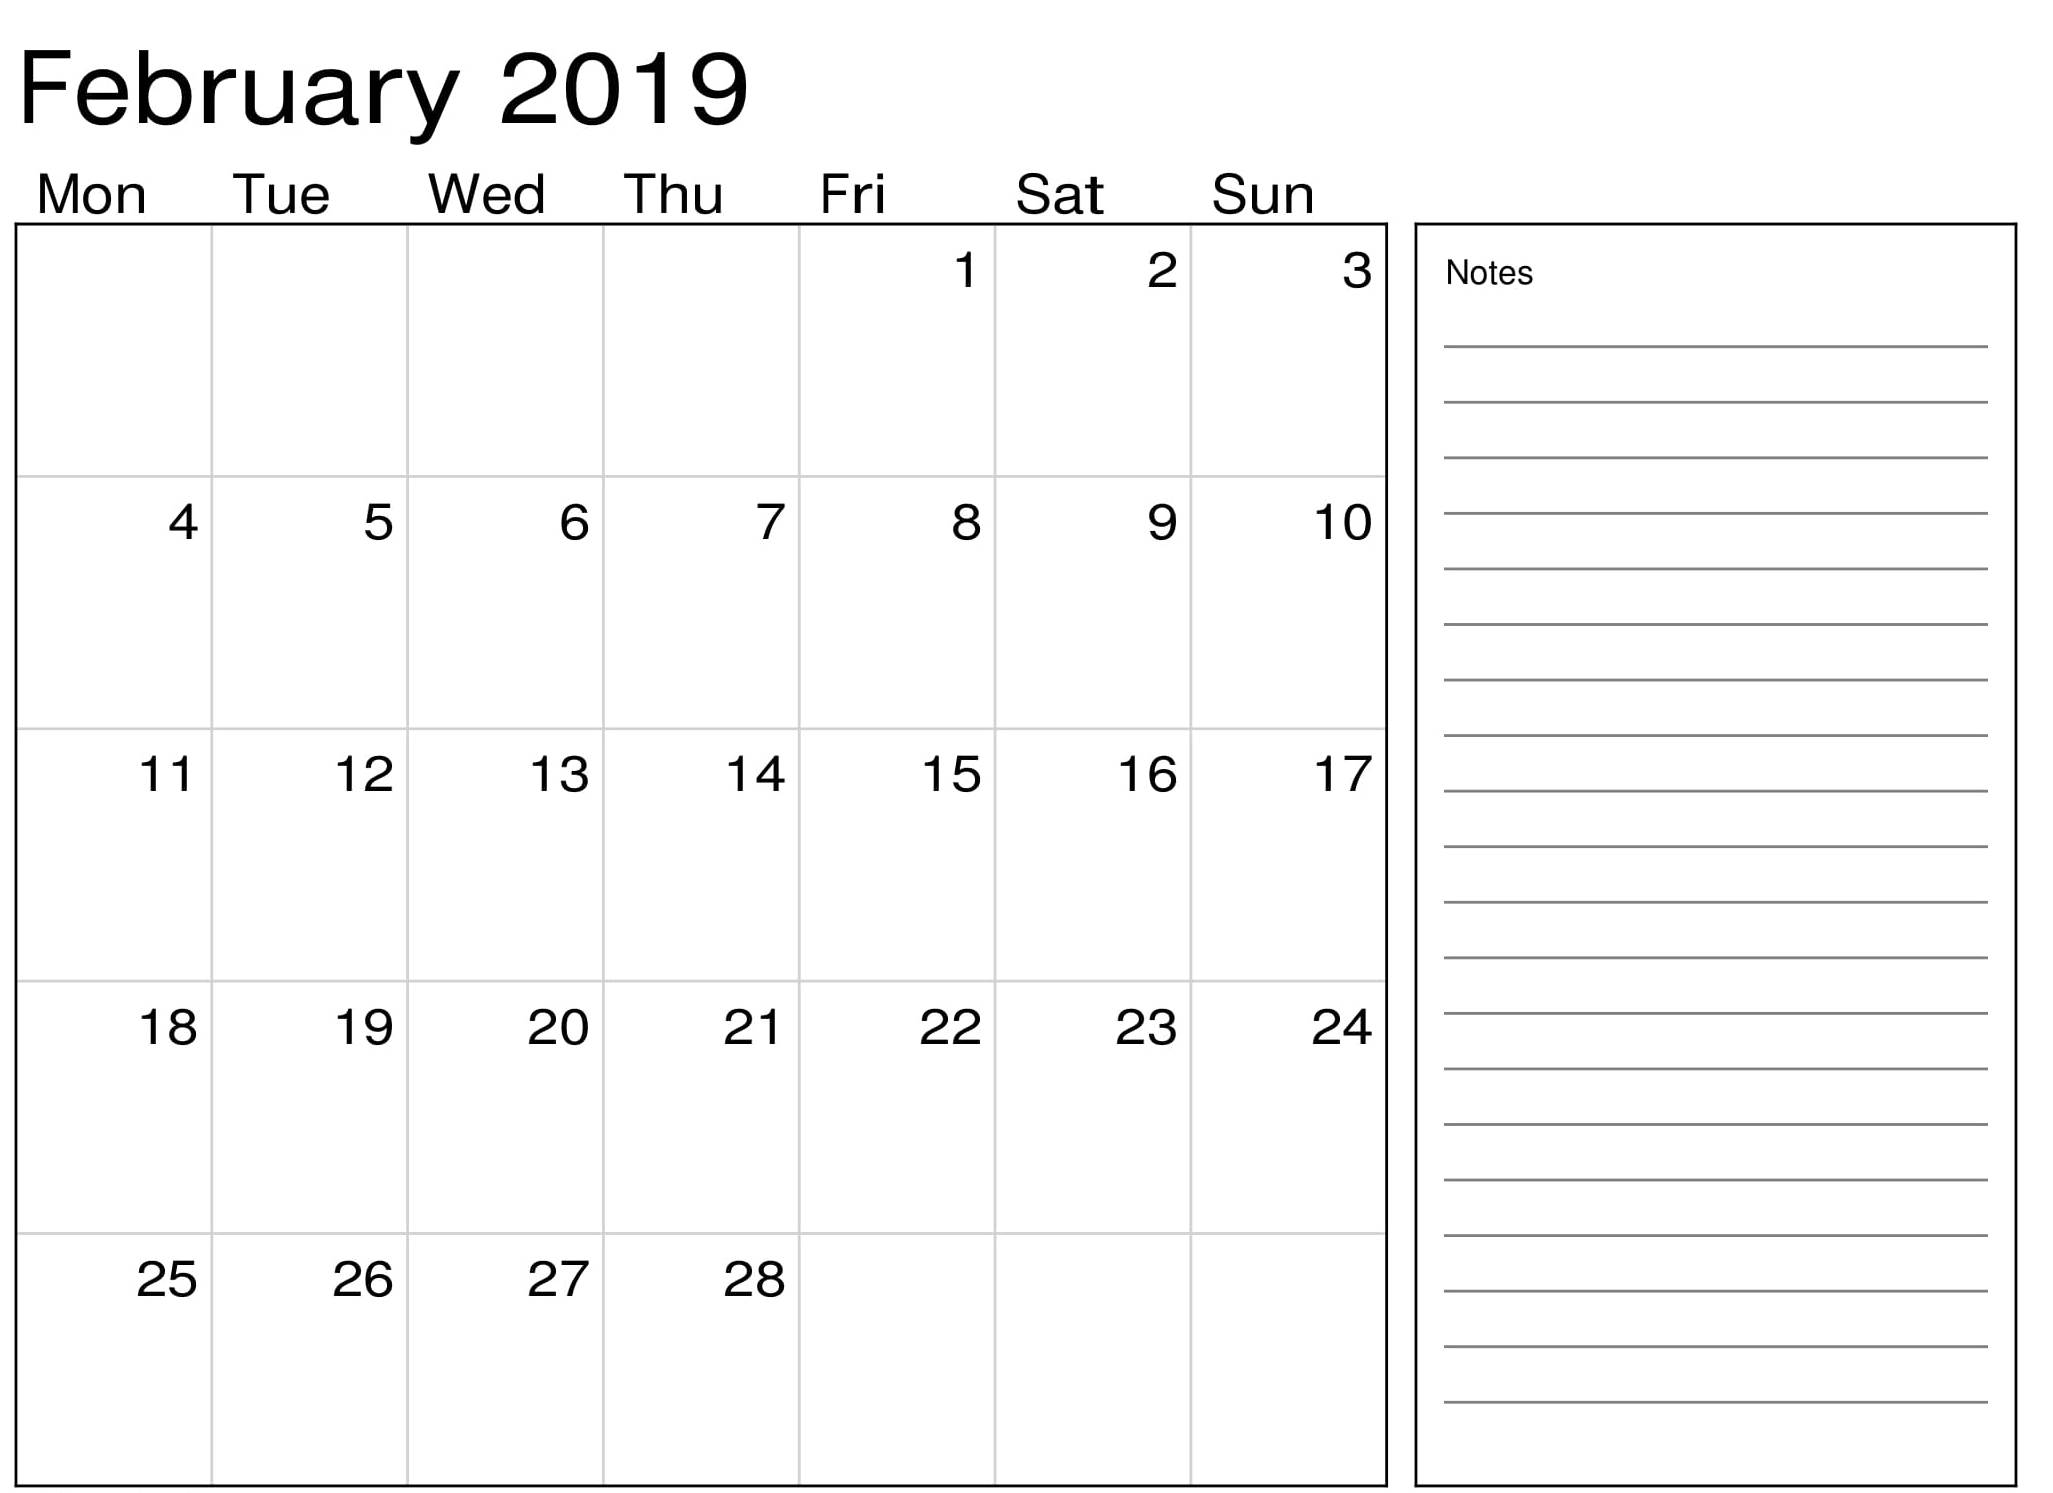 Print February 2019 Calendar With Notes